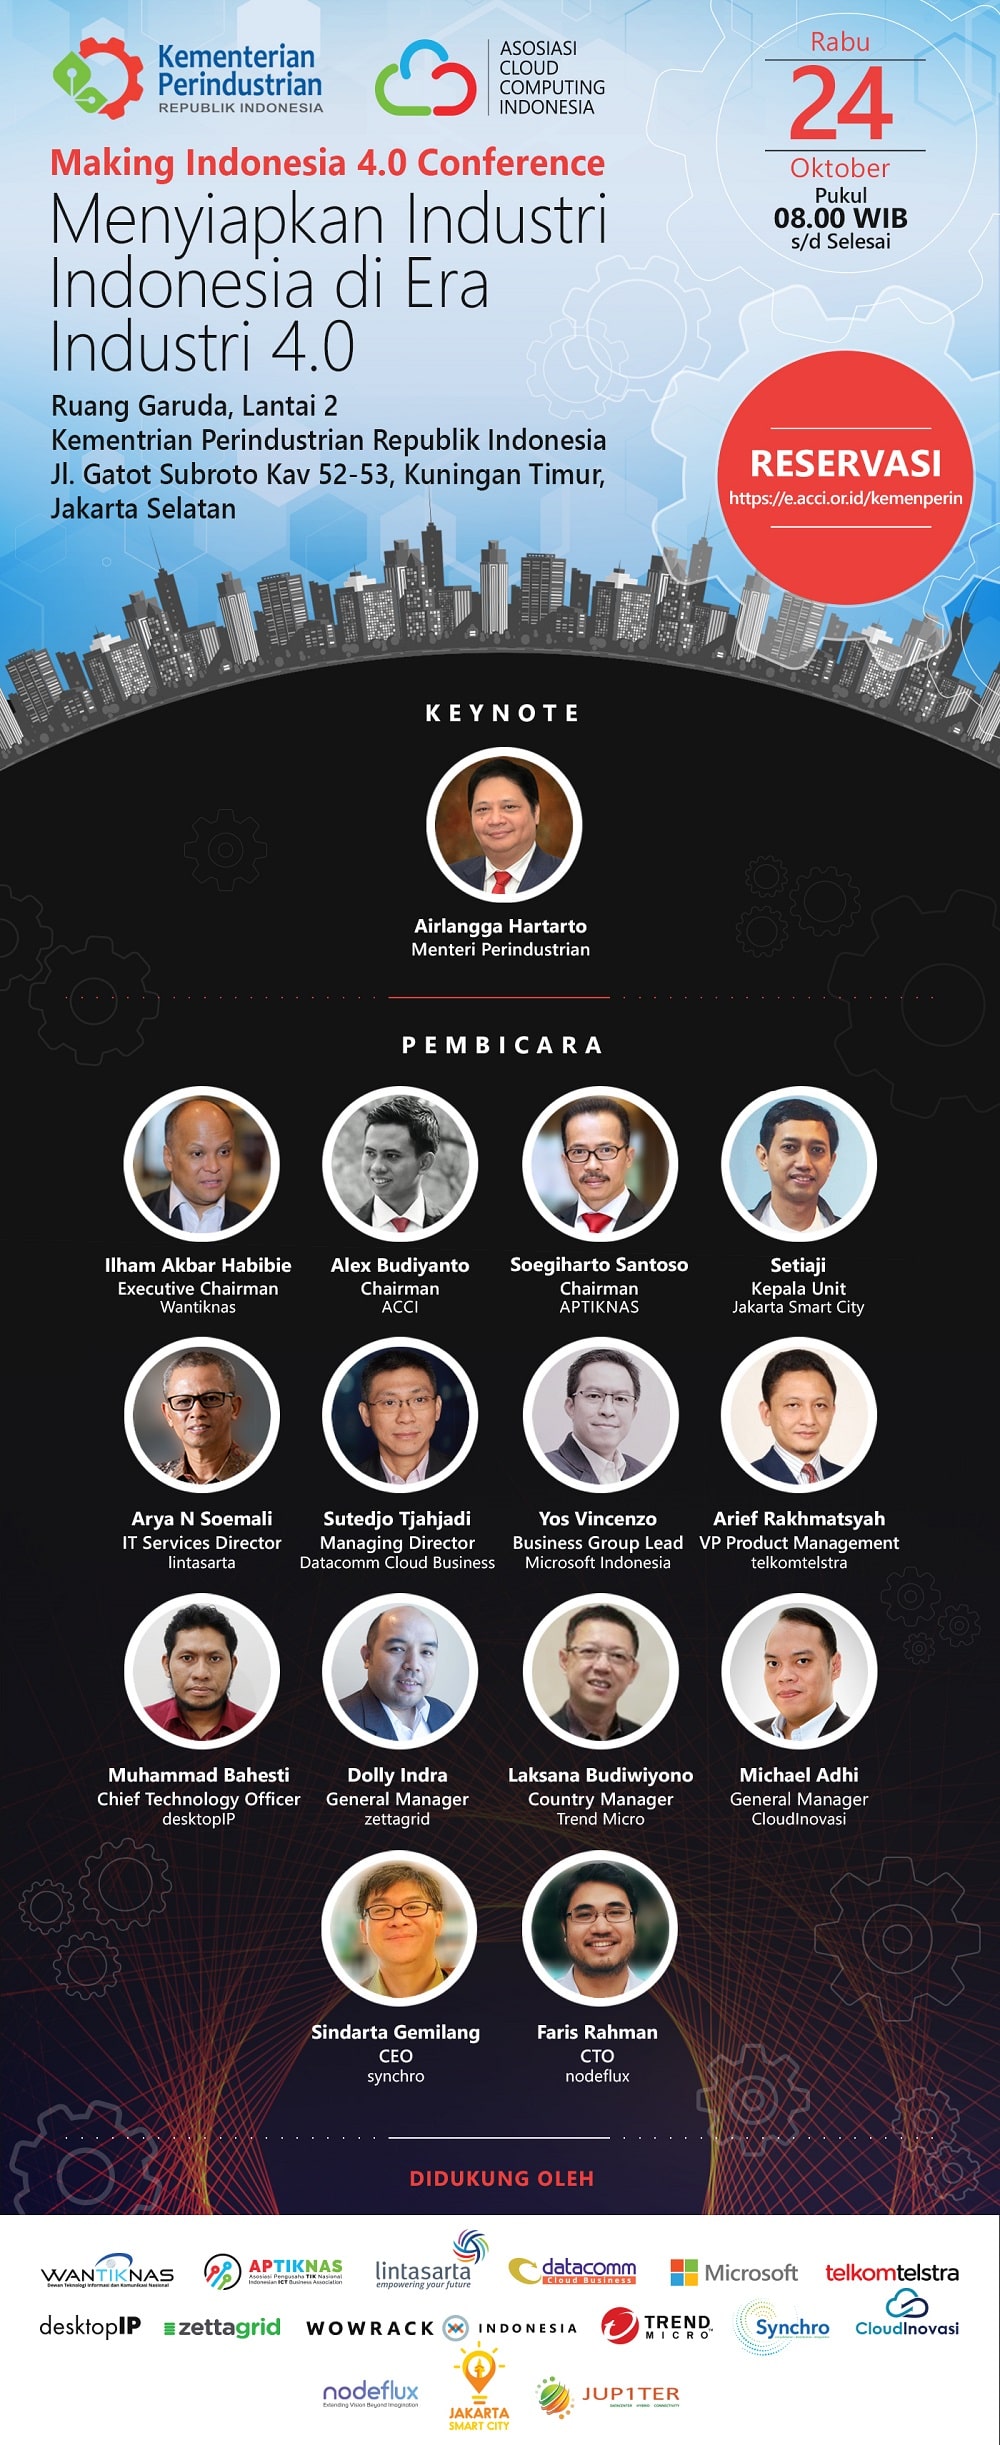 Making Indonesia 4.0 Conference